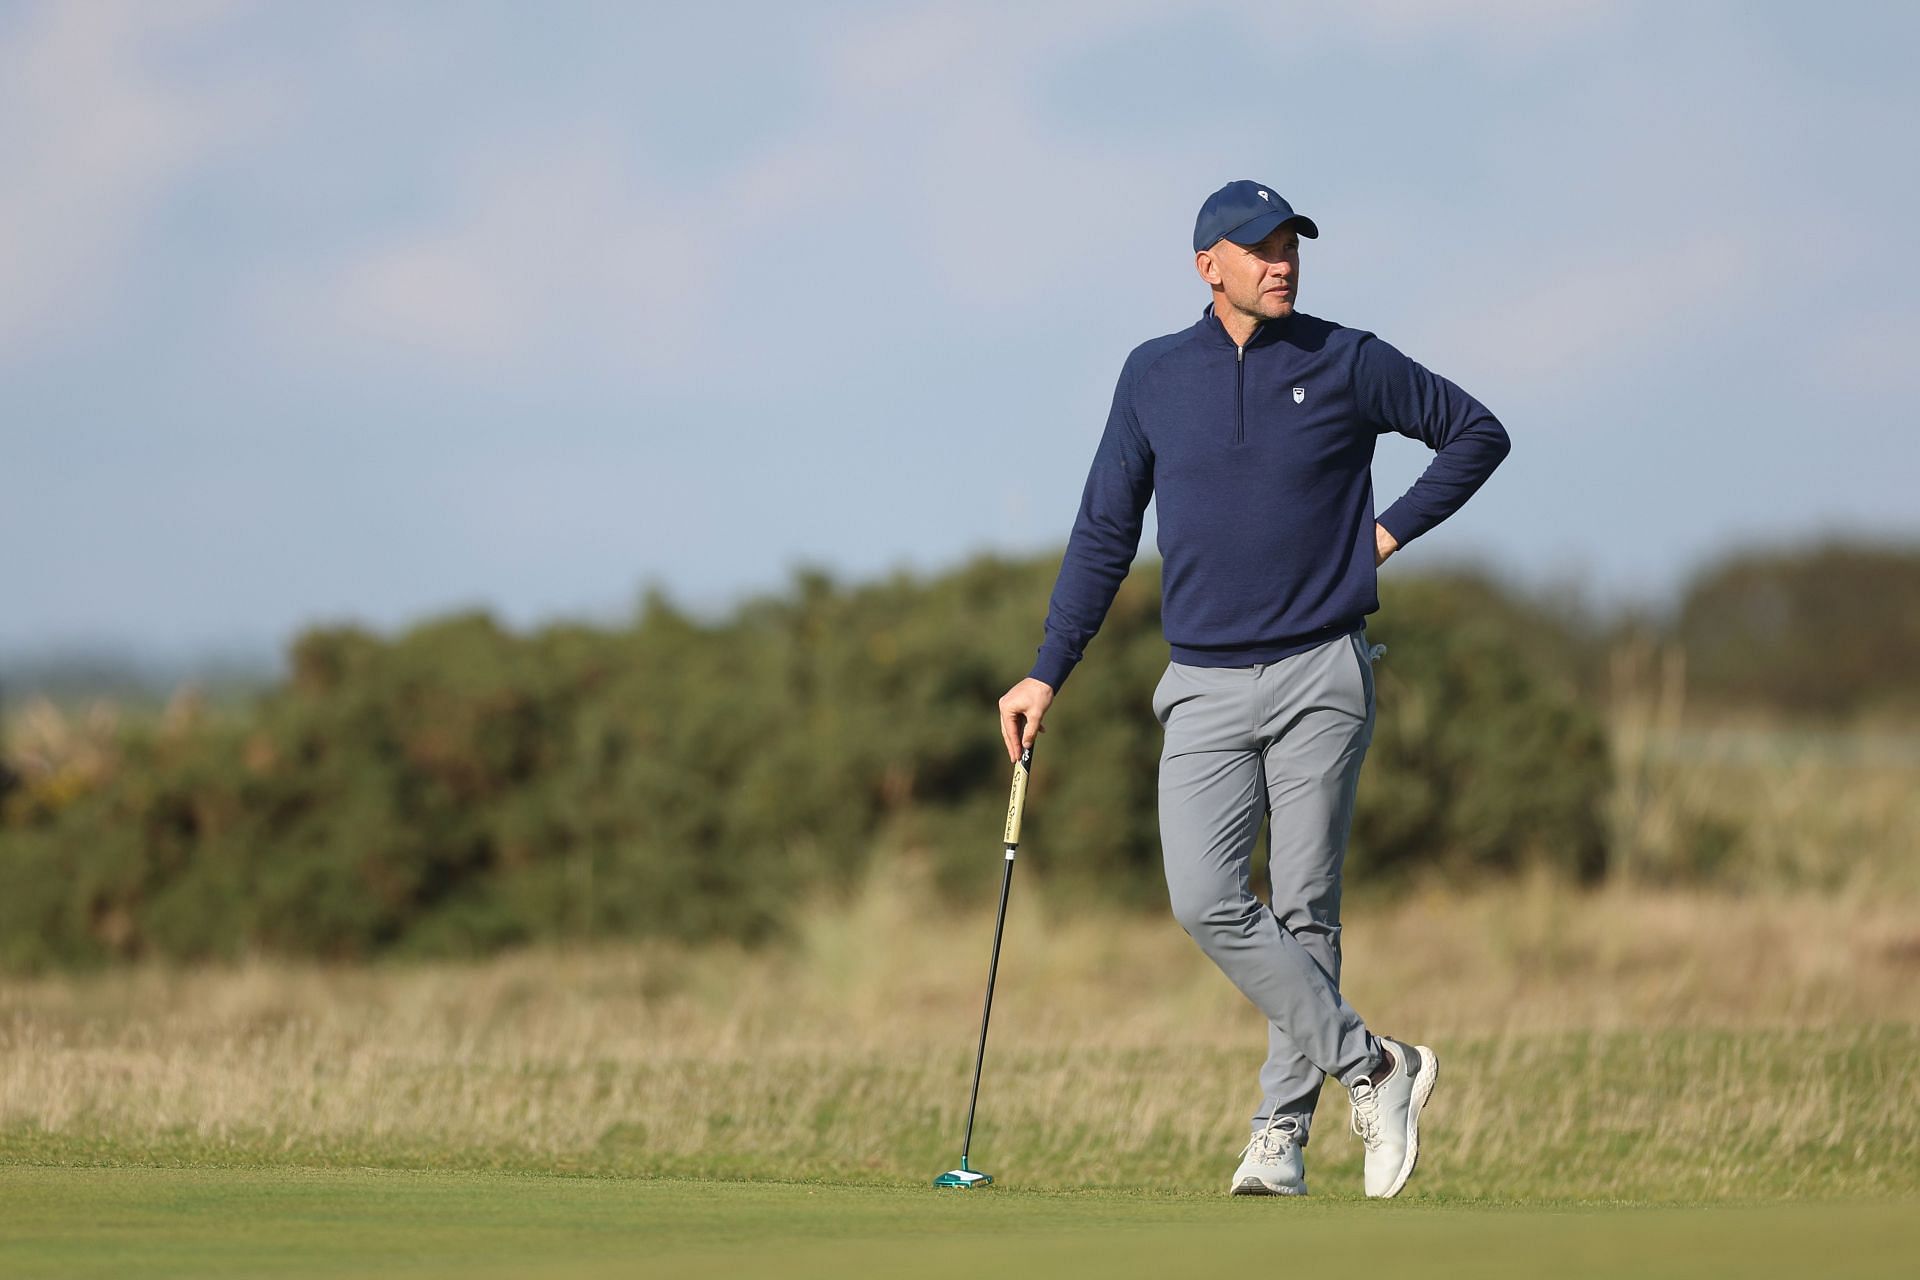 Andriy Shevchenko at the 2022 Alfred Dunhill Links Championship - Day One (Image via Oisin Keniry/Getty Images)